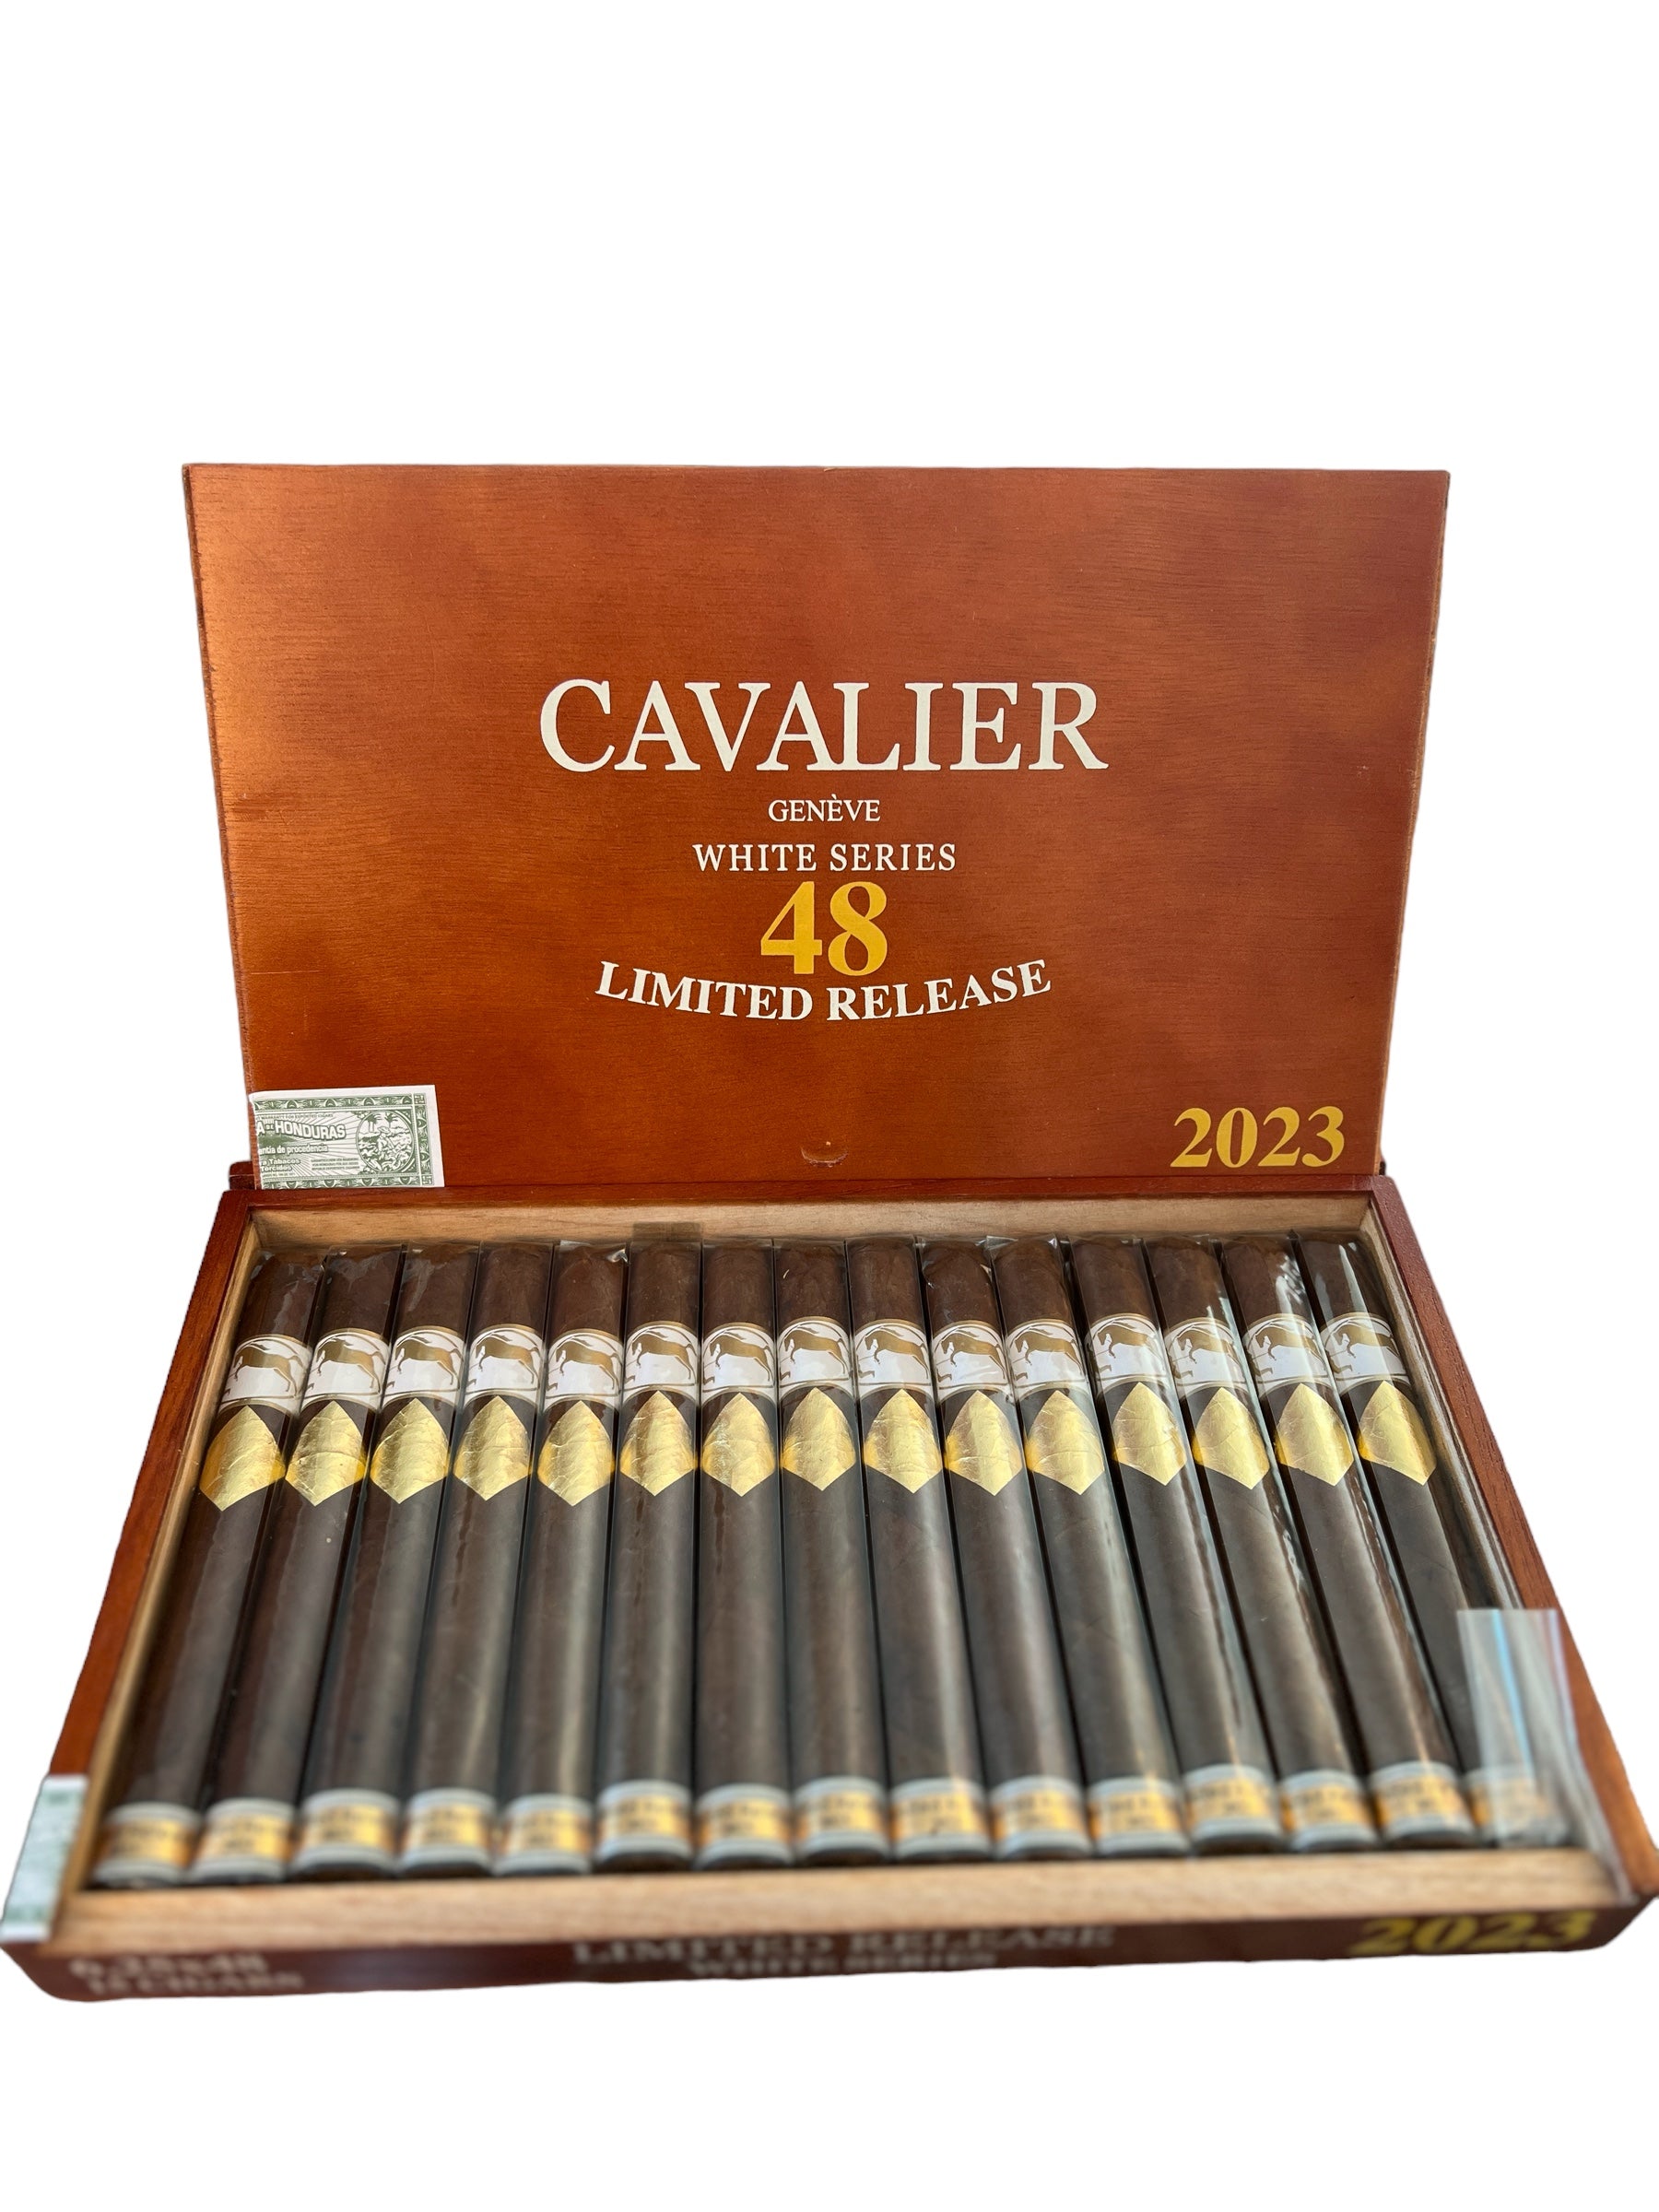 Cavalier - White Series 2023 Limited Release